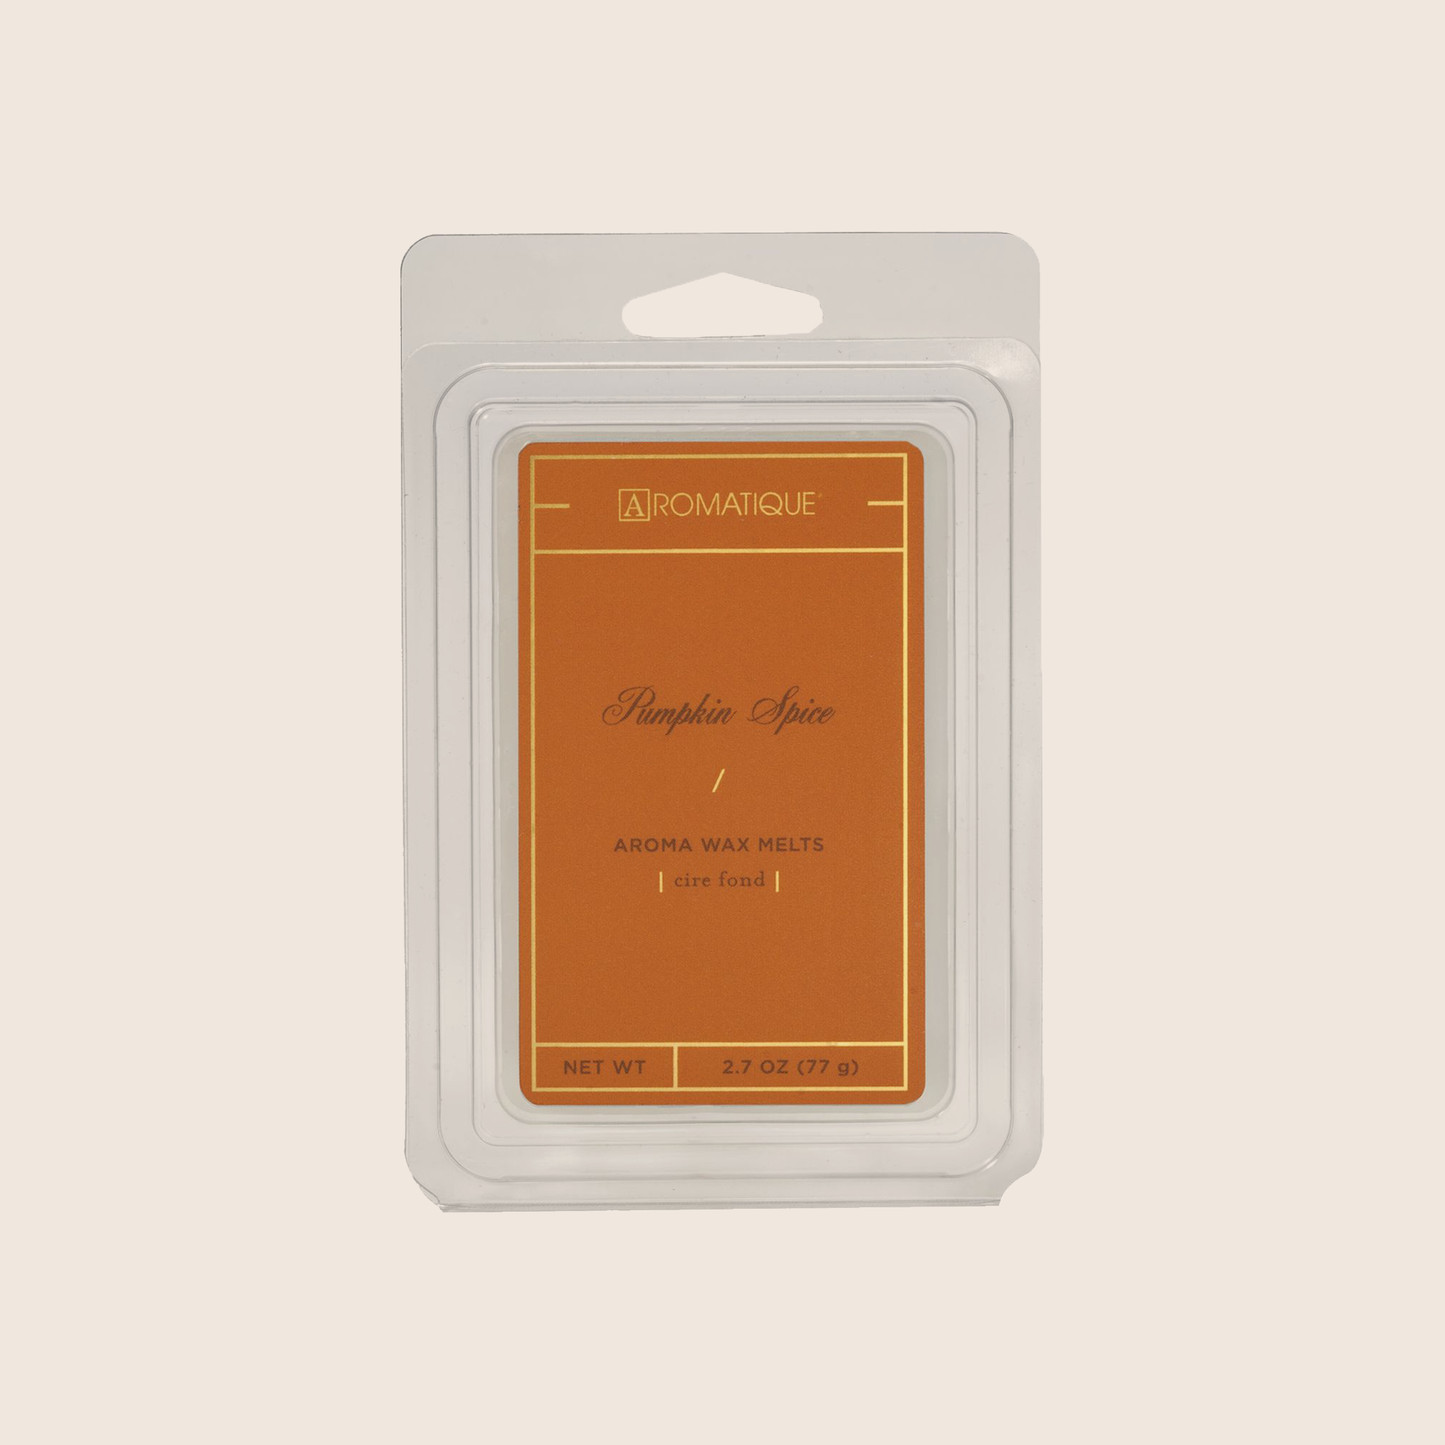 Load image into Gallery viewer, Our Pumpkin Spice fragrance is brimming with notes of spiced candied pumpkin and accented with ribbons of vanilla, maple, and cherry. Aromatique Wax Melts contain a set of 8 cubes made from 100% food-grade paraffin wax and a highly fragrant aroma - no wicks or flames needed.
